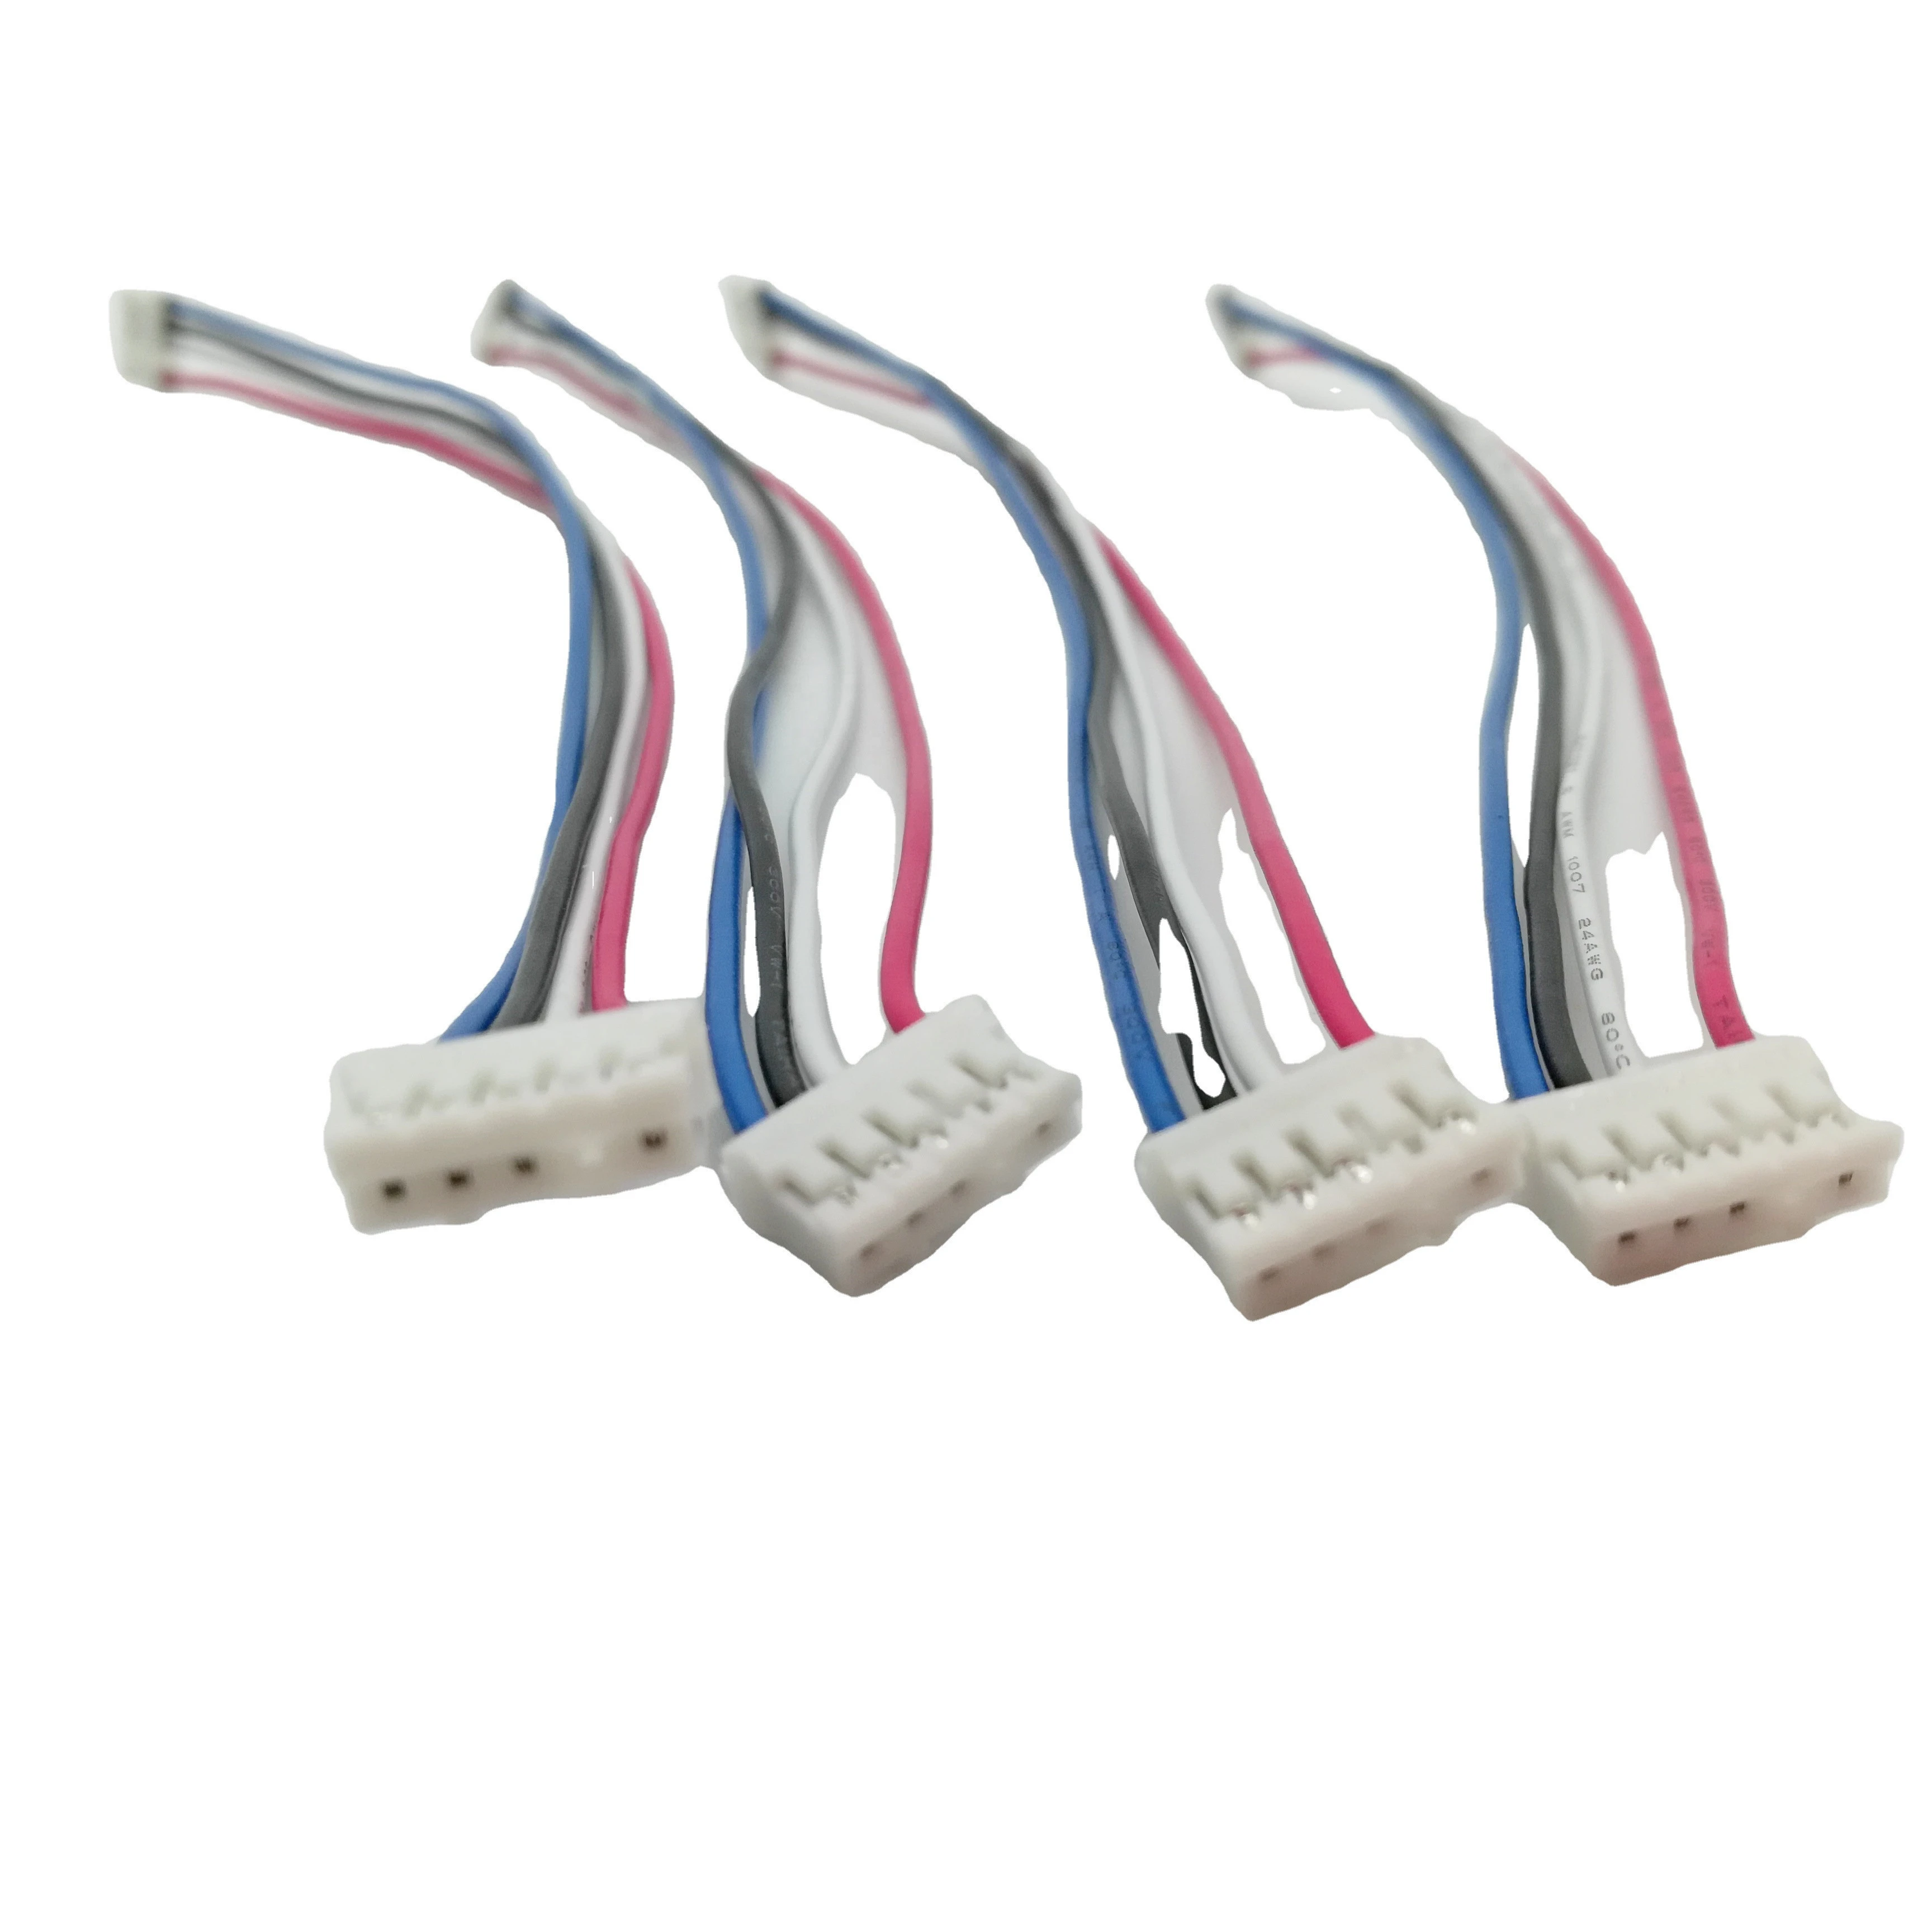 Custom JST PH 5pin applicator terminal connector wire harness